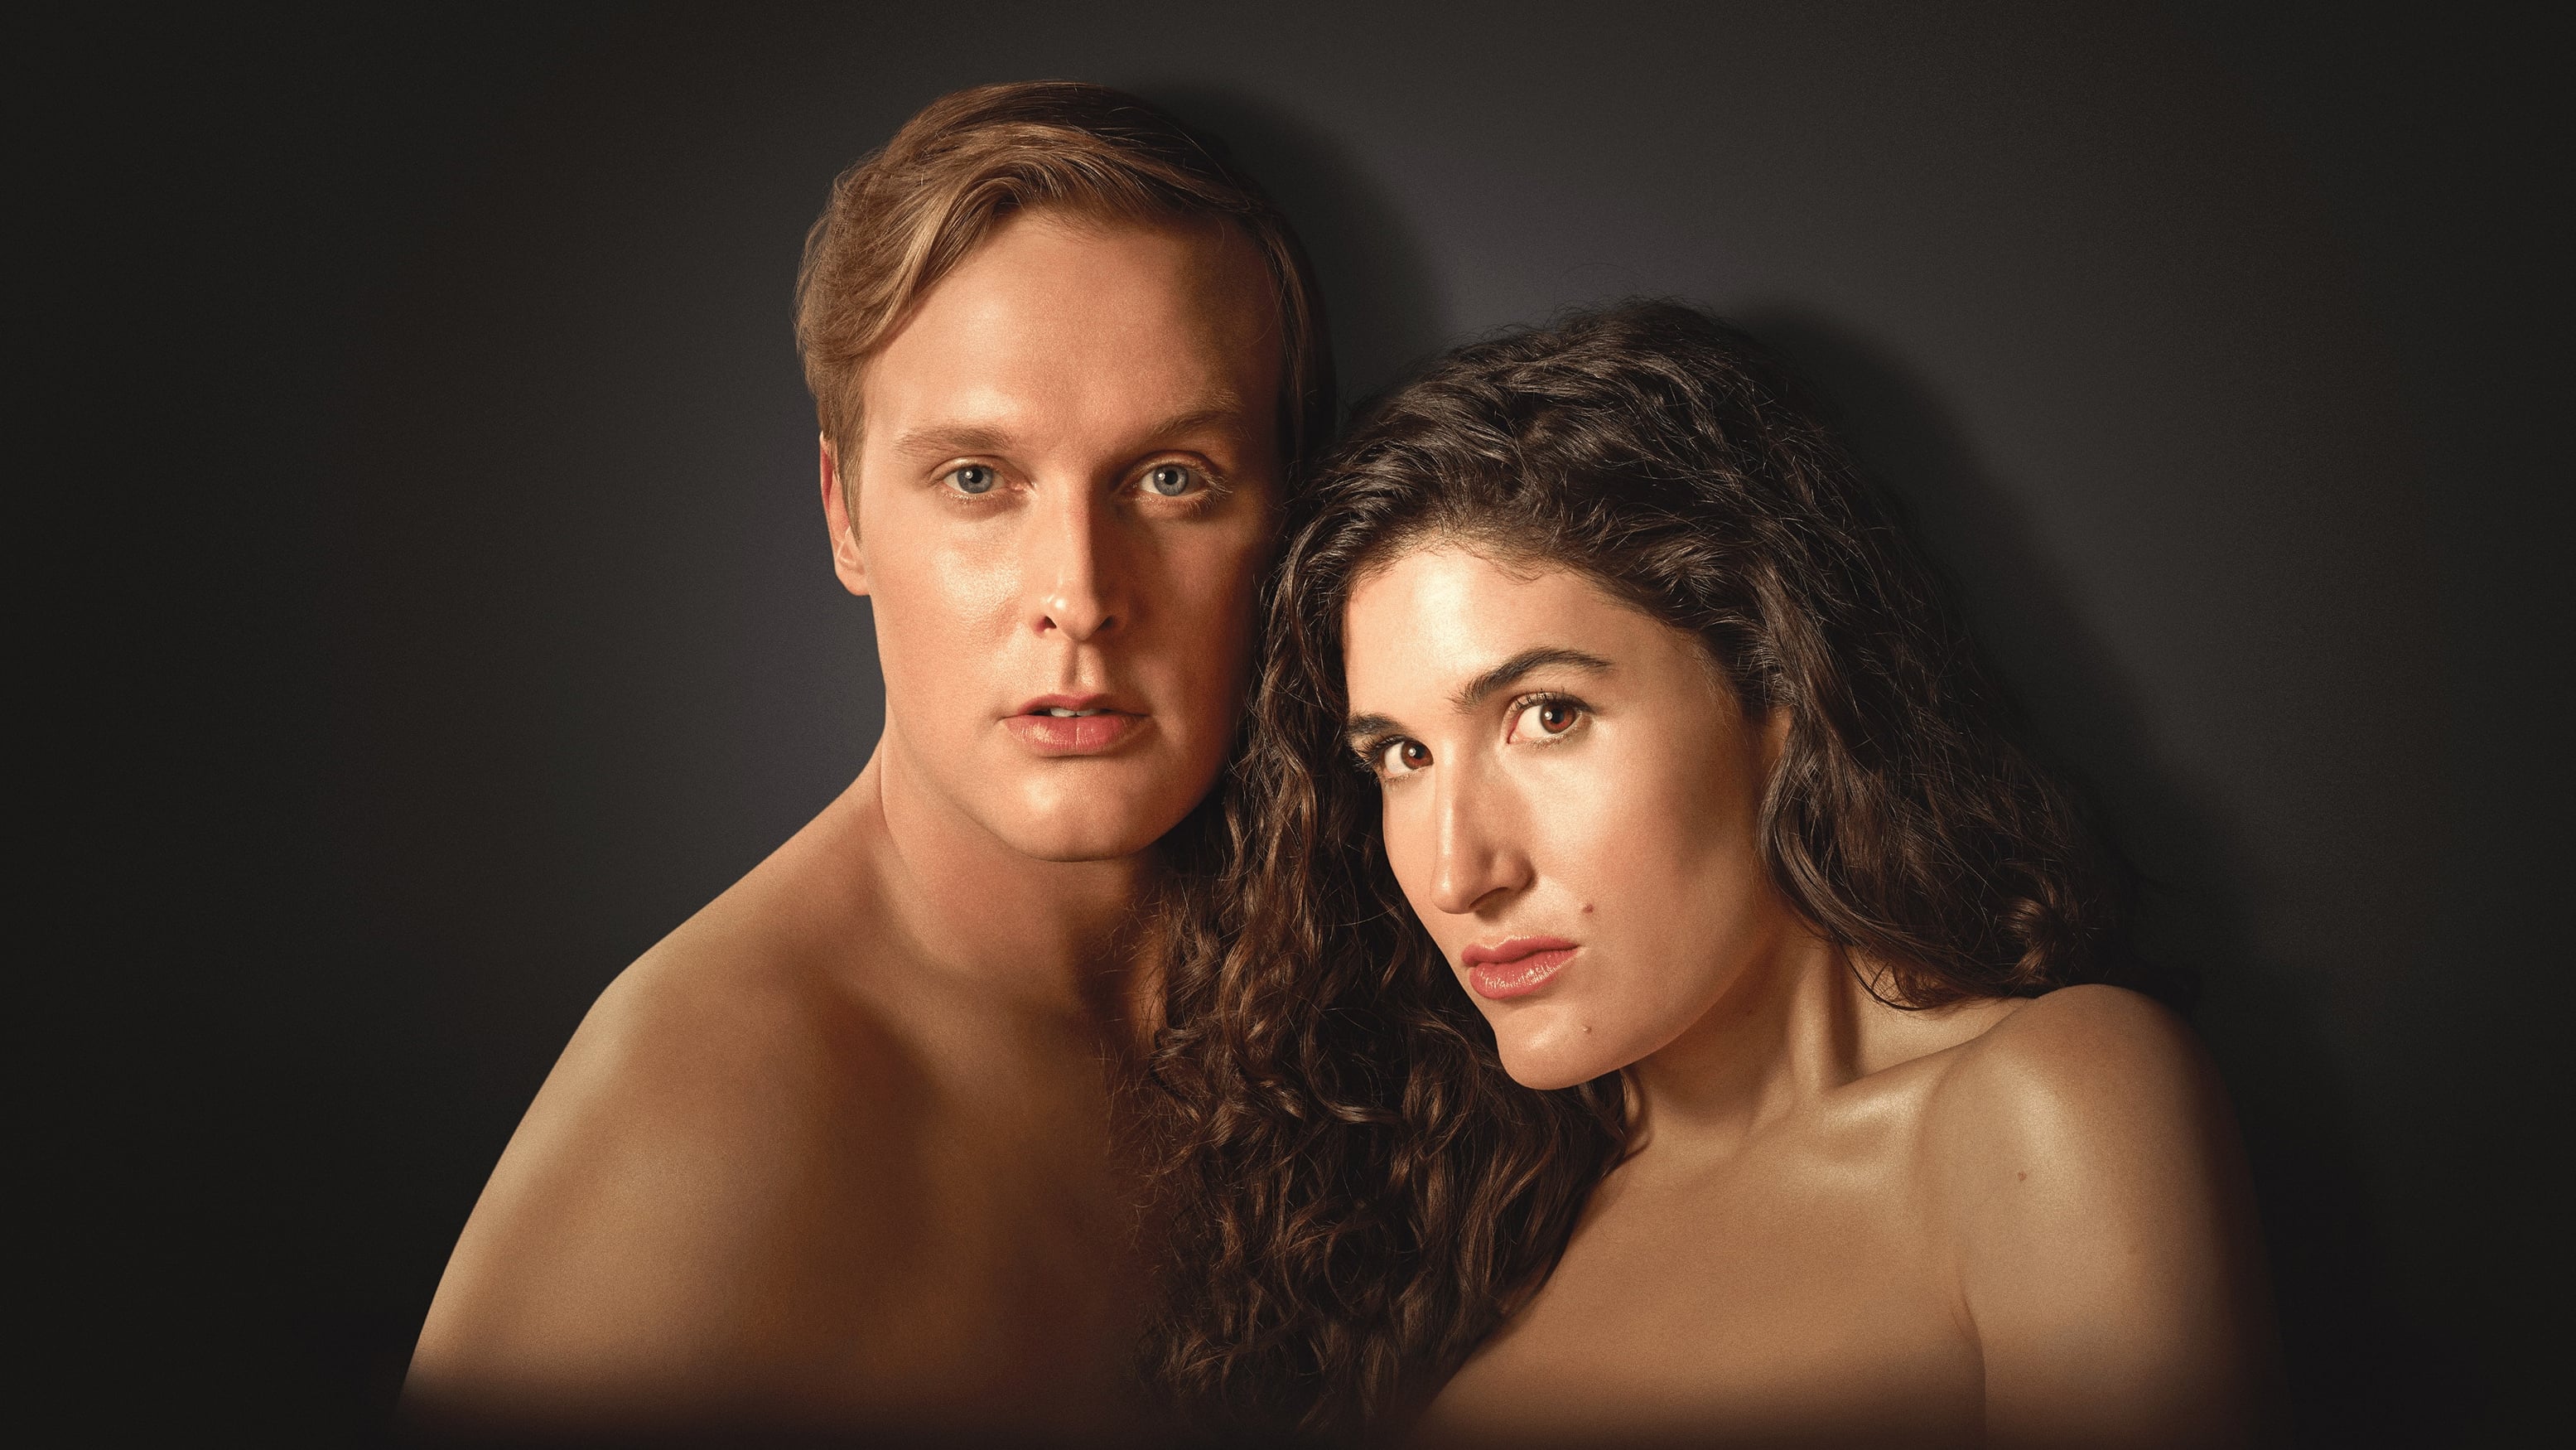 Would It Kill You to Laugh? Starring Kate Belant + John Early